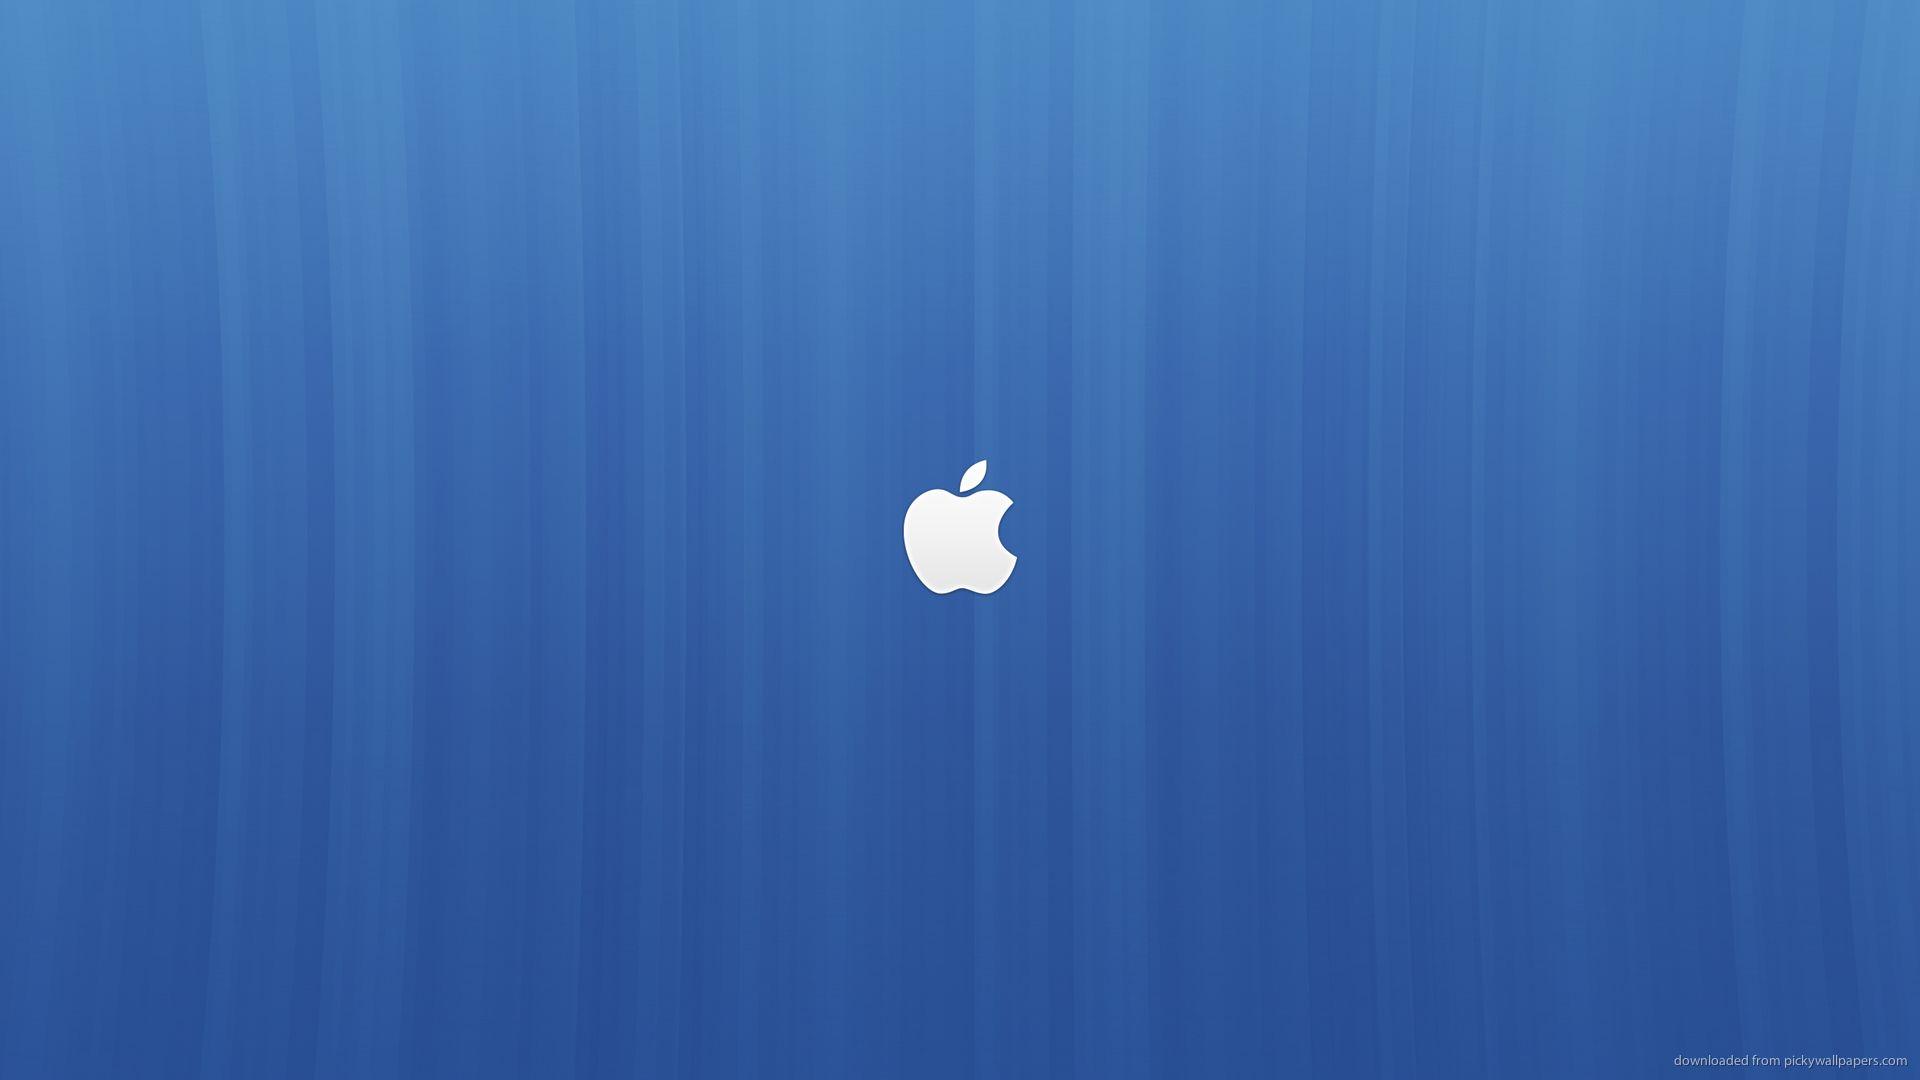 Apple Backgrounds Wallpapers - Wallpaper Cave